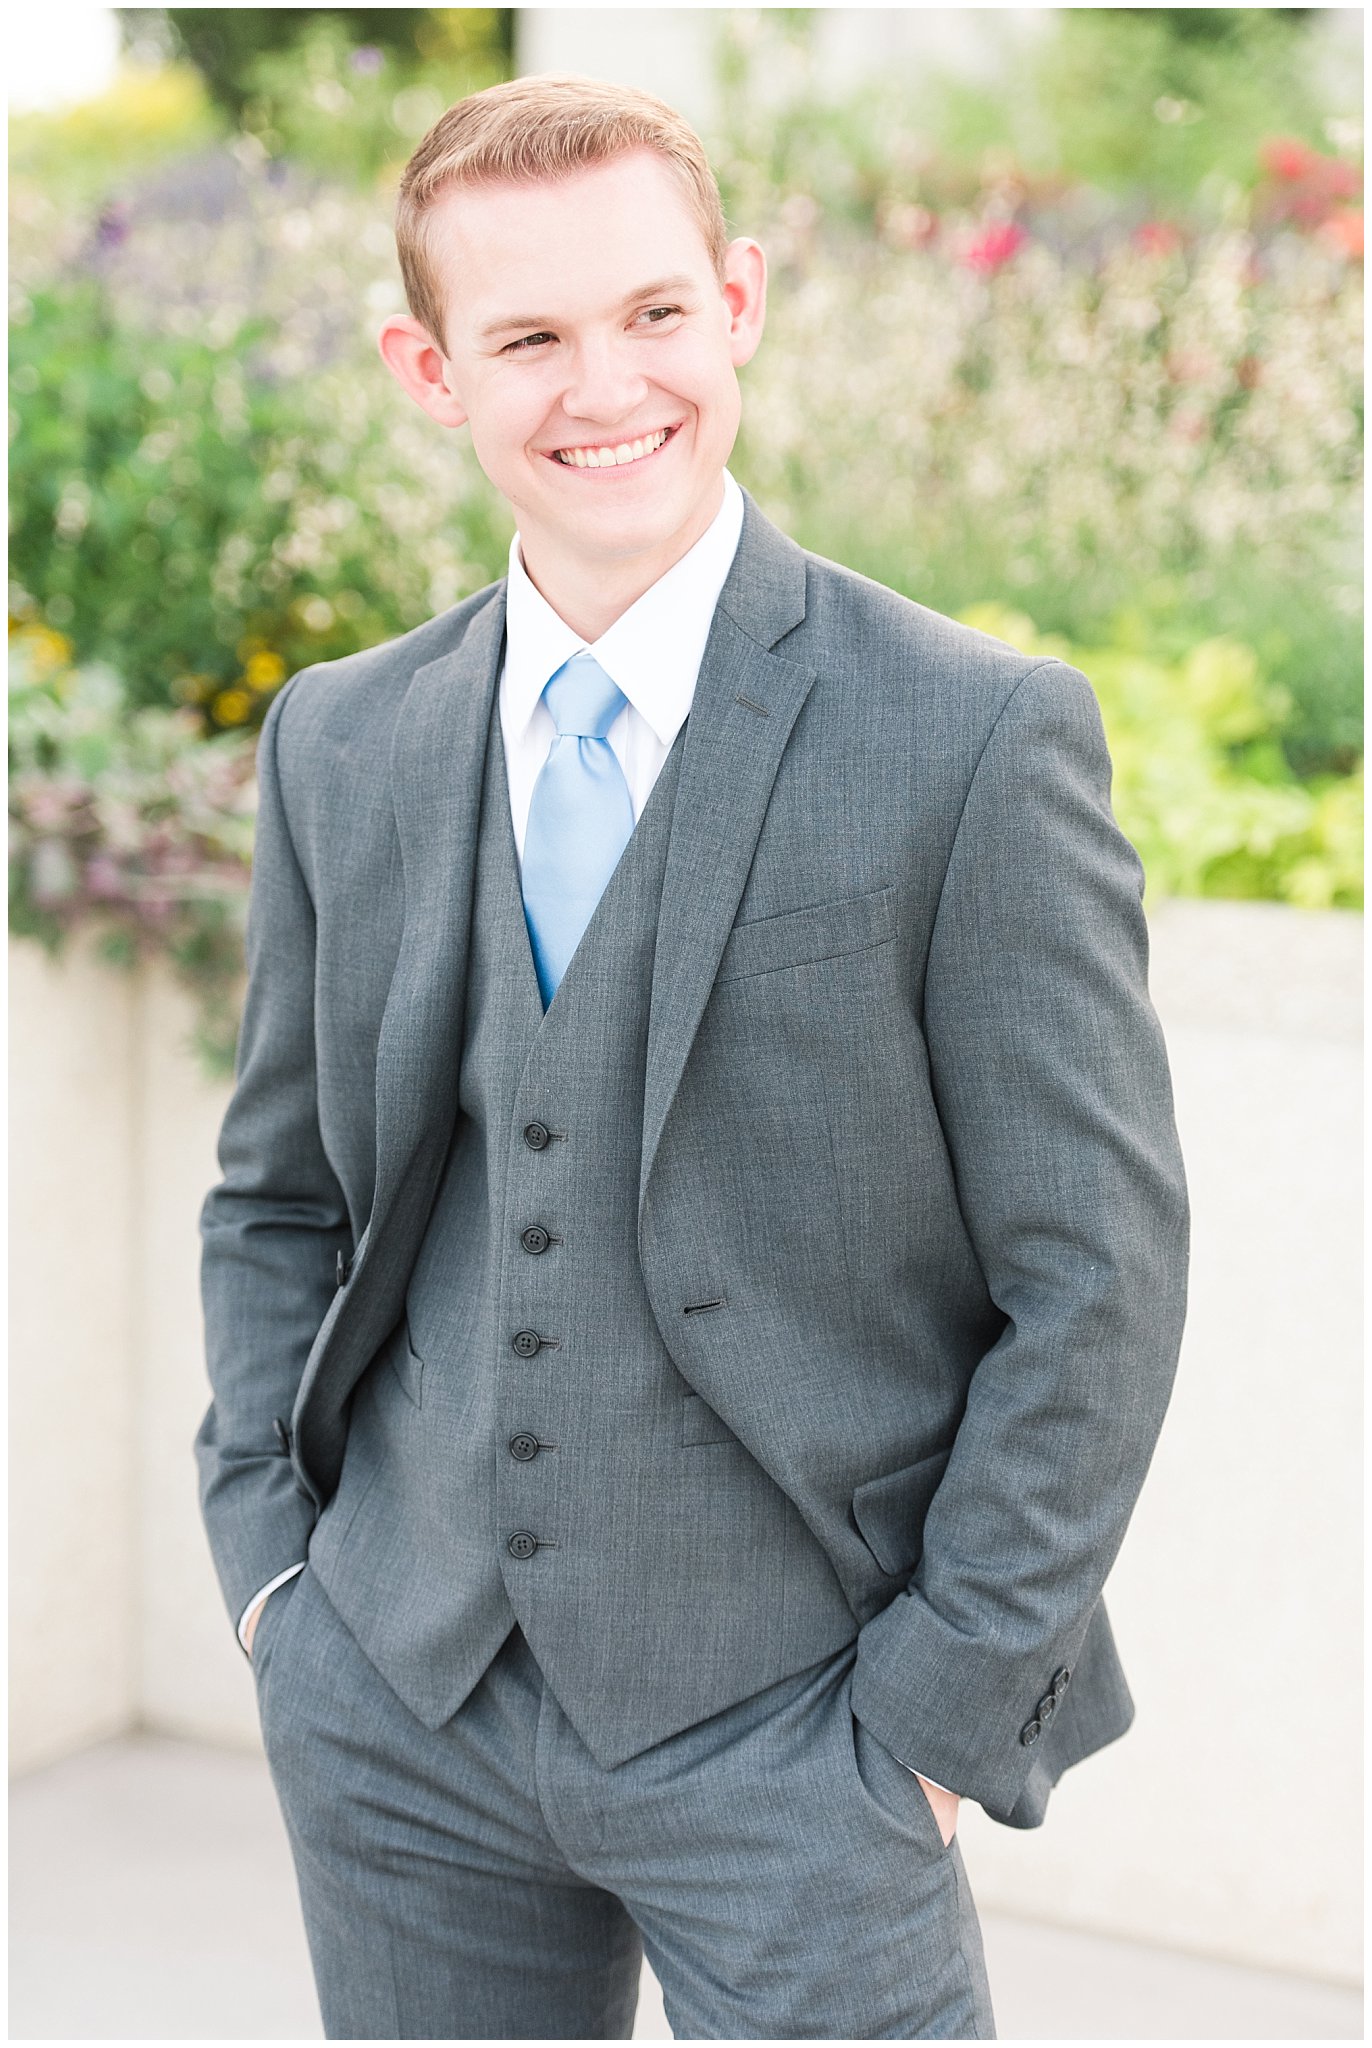 Groom portraits with groom in grey suit and light blue tie | Ogden Temple Summer Formal Session | Ogden Temple Wedding | Jessie and Dallin Photography